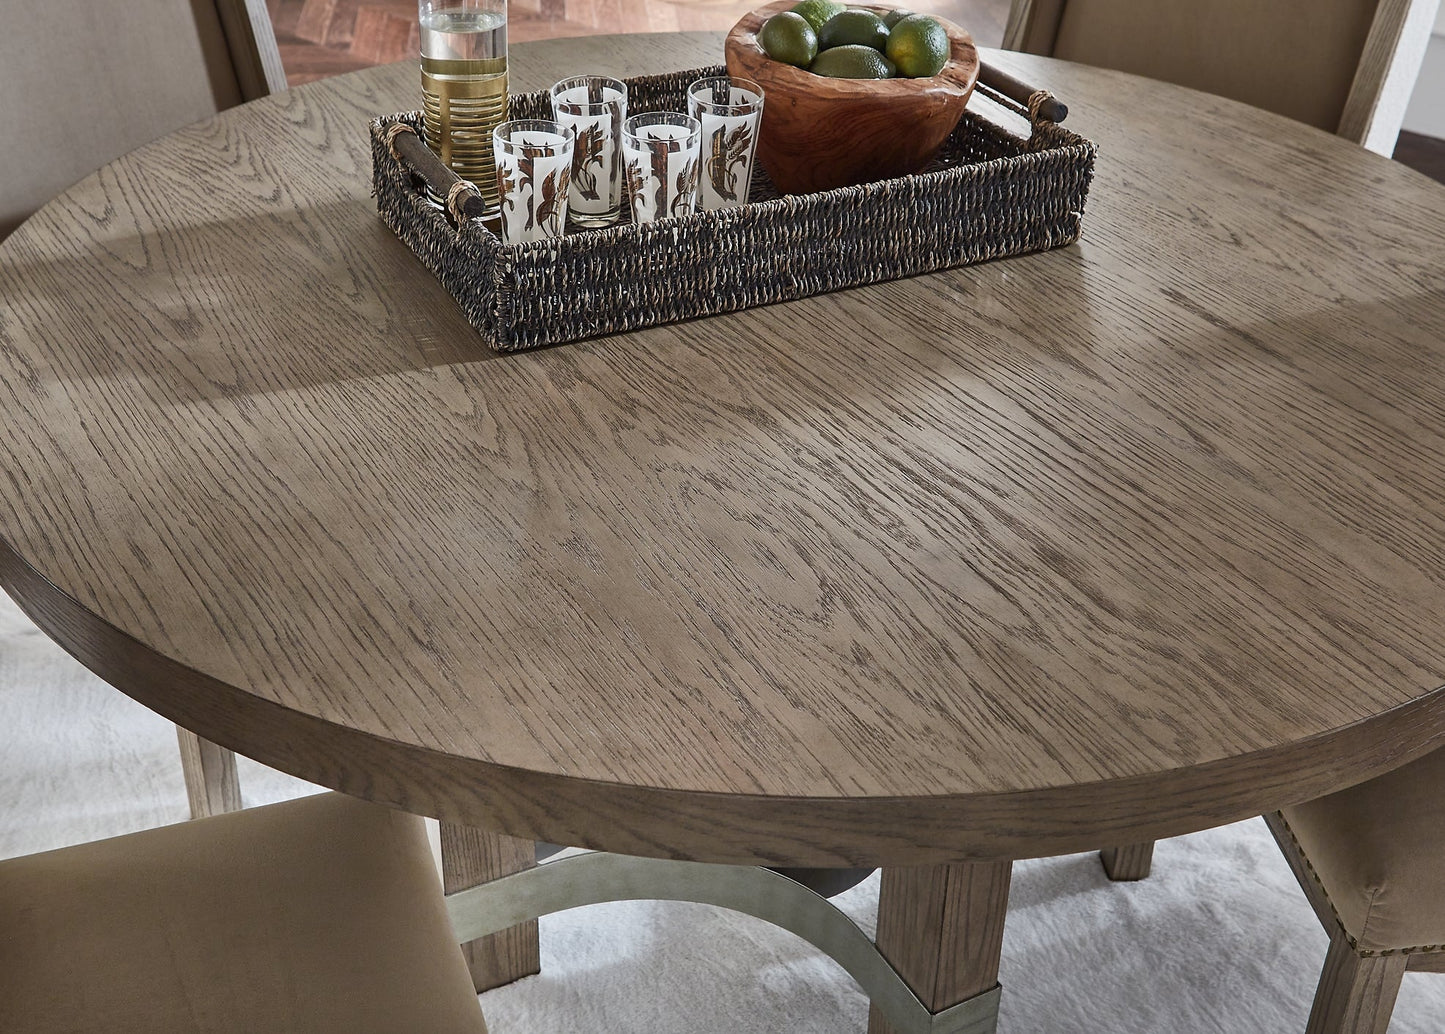 Chrestner Round Dining Room Table at Towne & Country Furniture (AL) furniture, home furniture, home decor, sofa, bedding